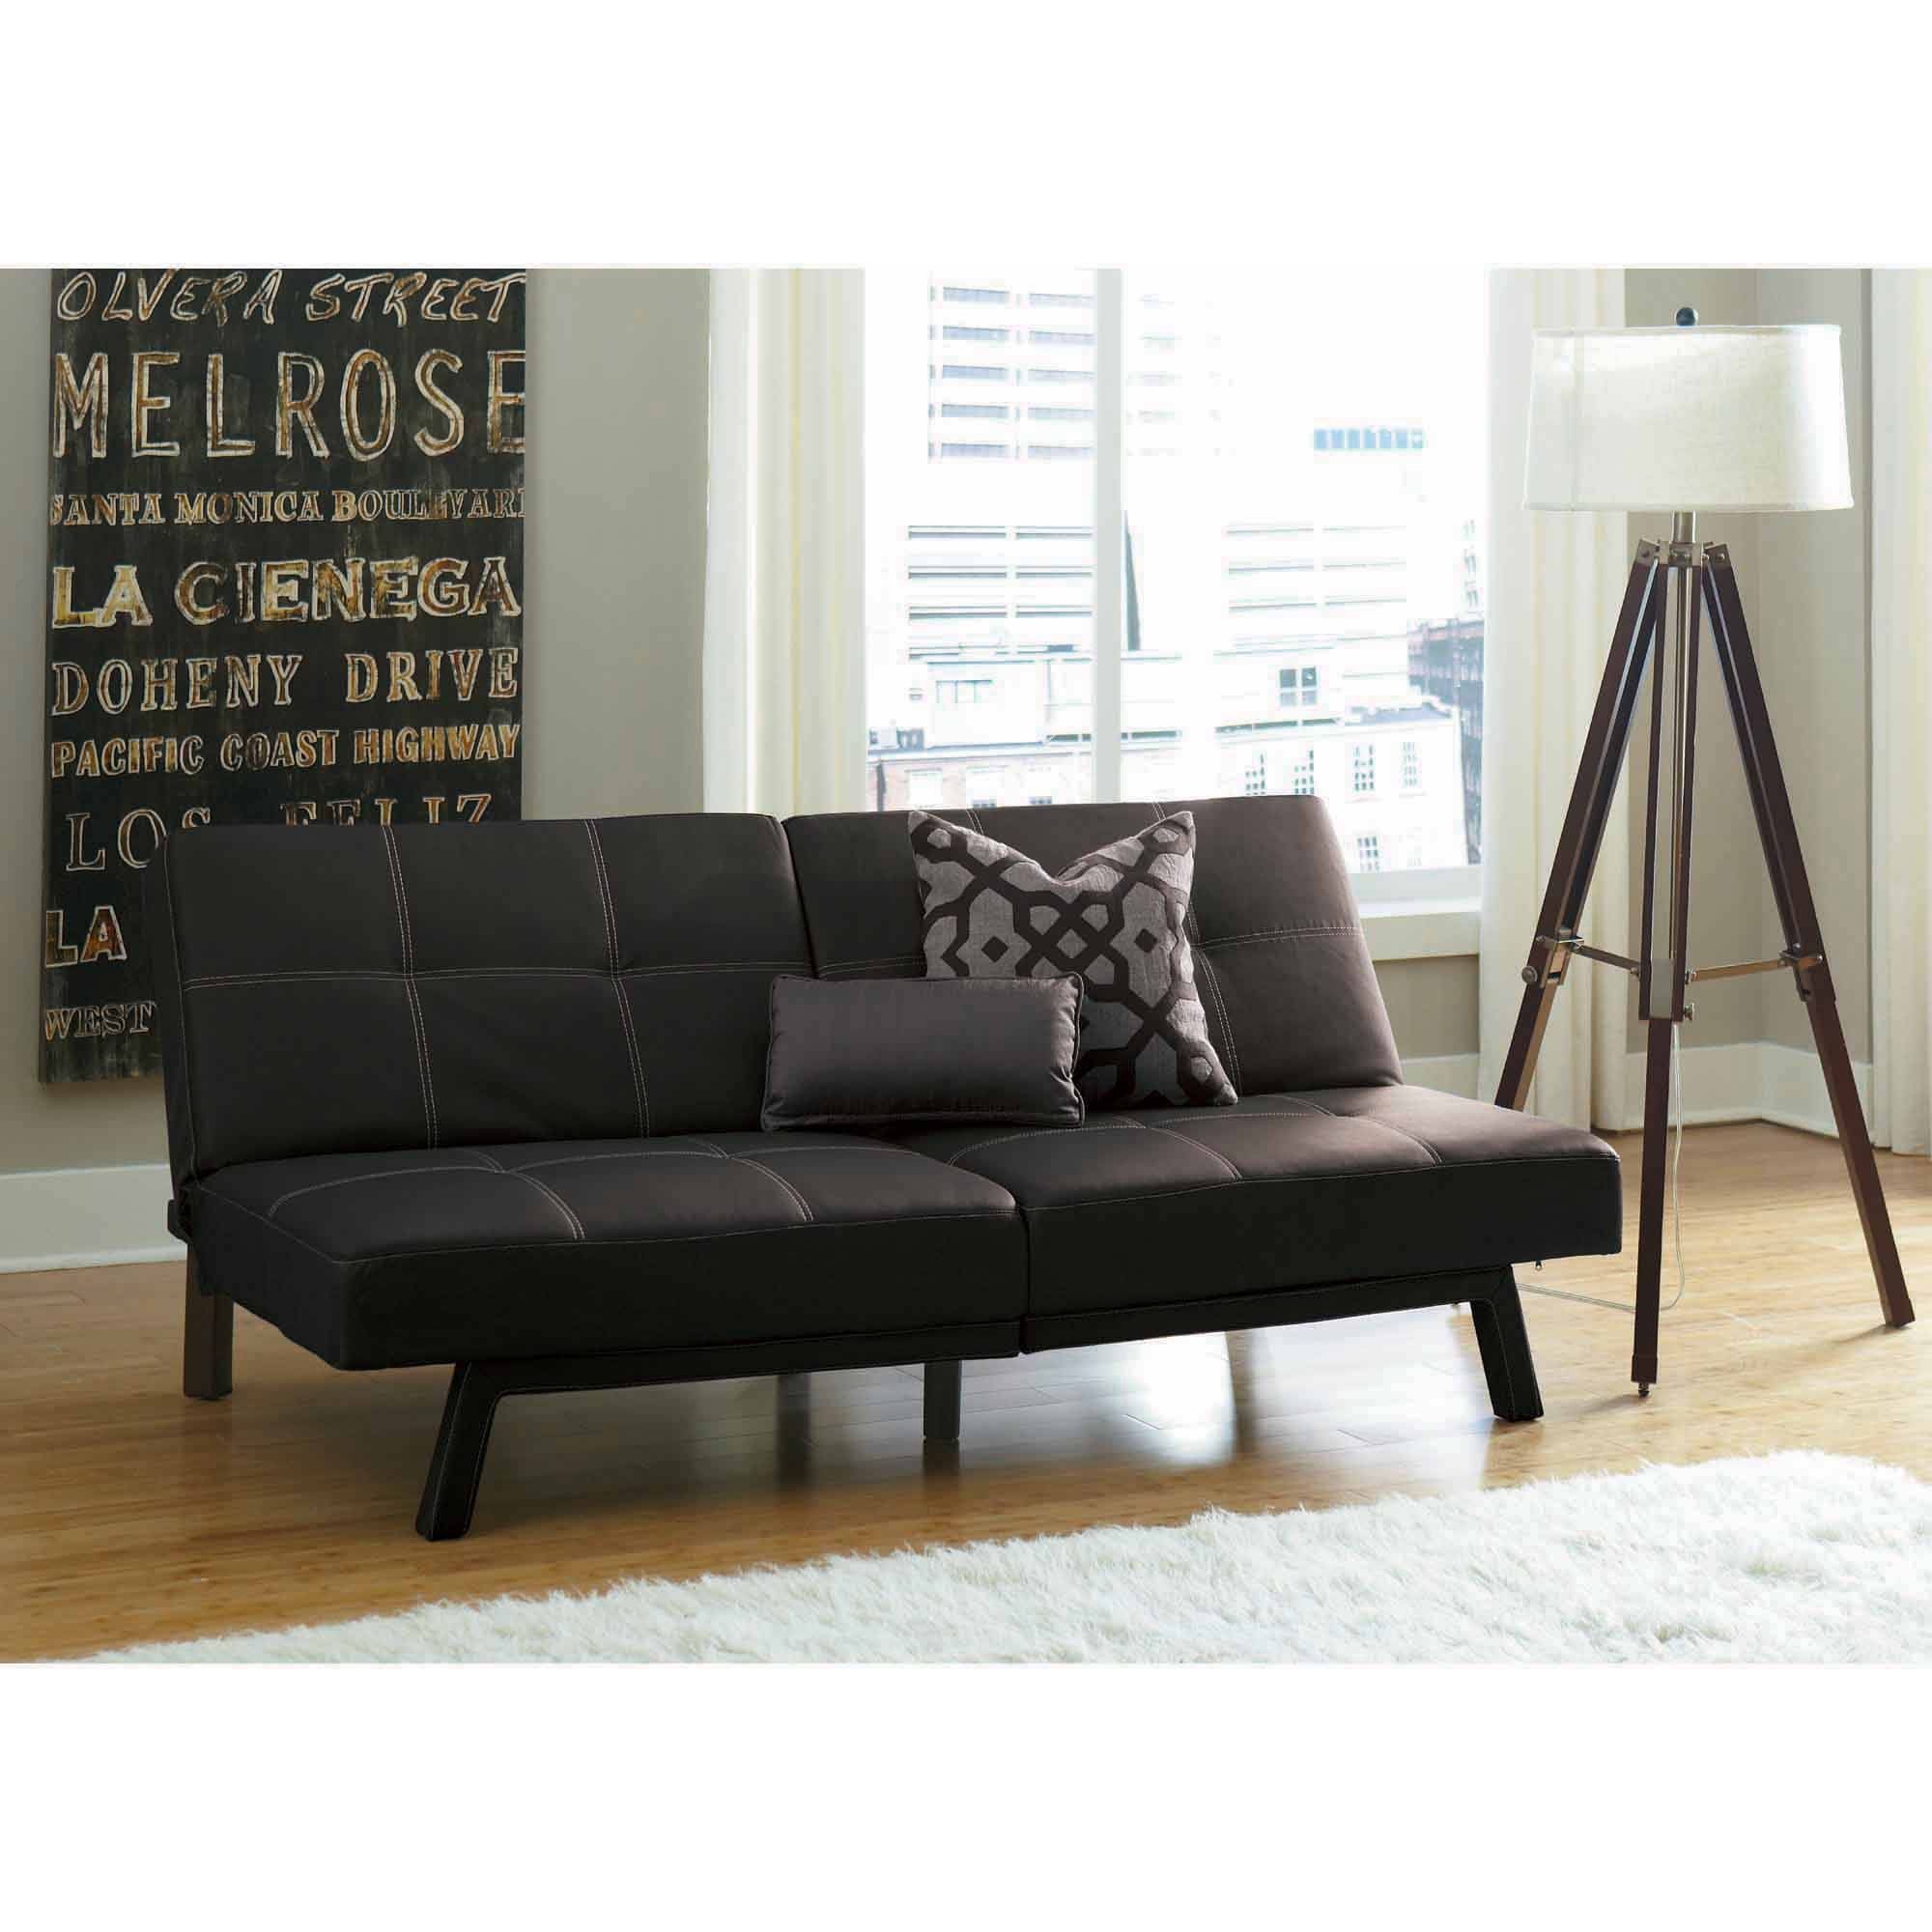 Faux Leather Convertible Sofa Bed | Centerfieldbar Inside Faux Leather Futon Sofas (View 7 of 15)